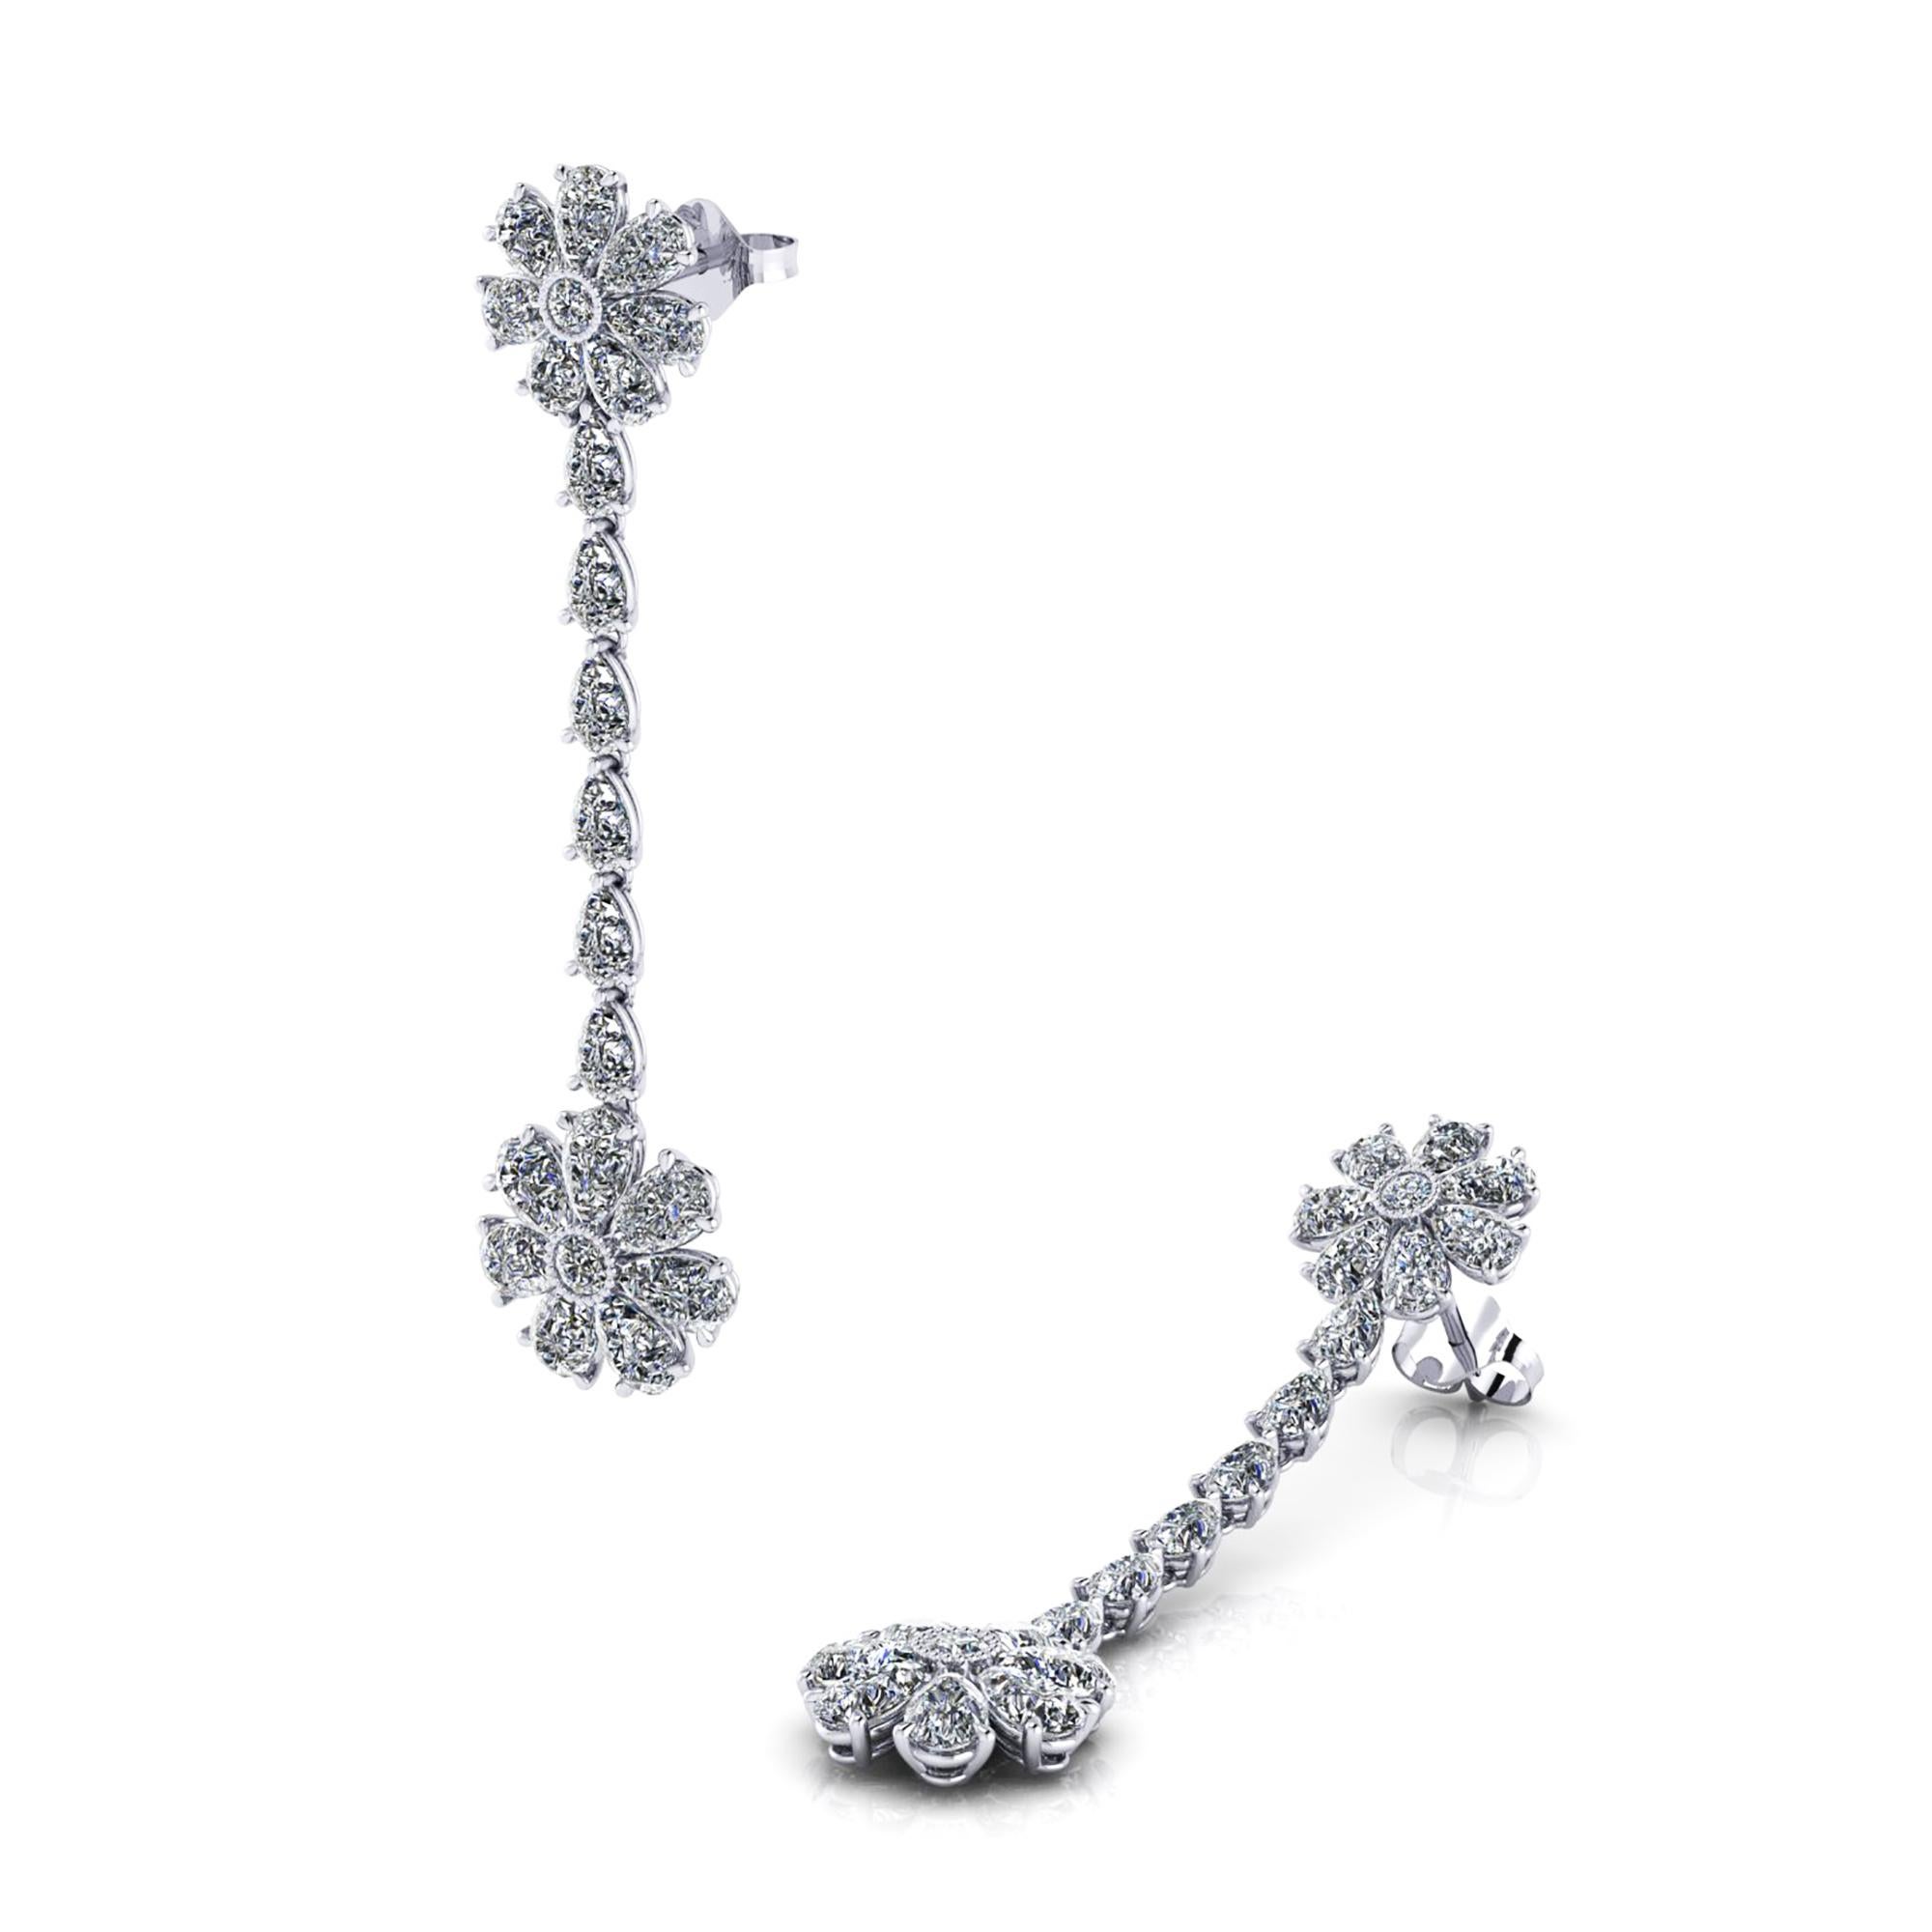 5.60 carat Pear Shape diamond Flower dangling earrings, conceived in Platinum 950 by FERRUCCI, with the best Italian craftsmanship in New York city, delicate and sophisticated